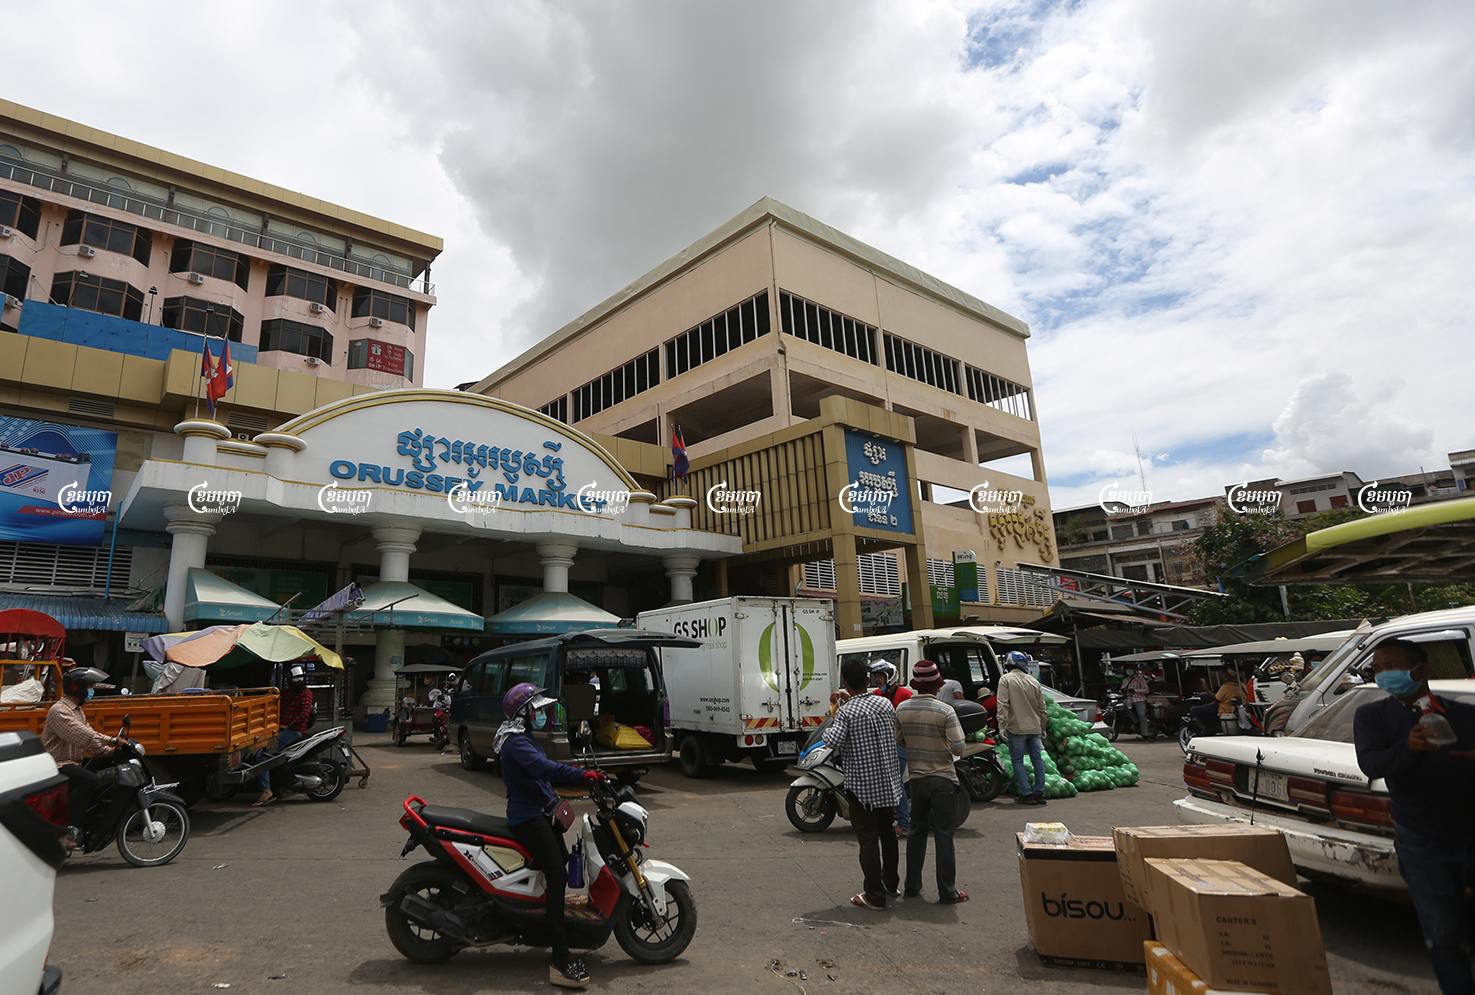 O'Russei Market reopens the day after municipal authorities lifted the remaining restrictions on public markets, June 15, 2021. CamboJA/ Pring Samrang